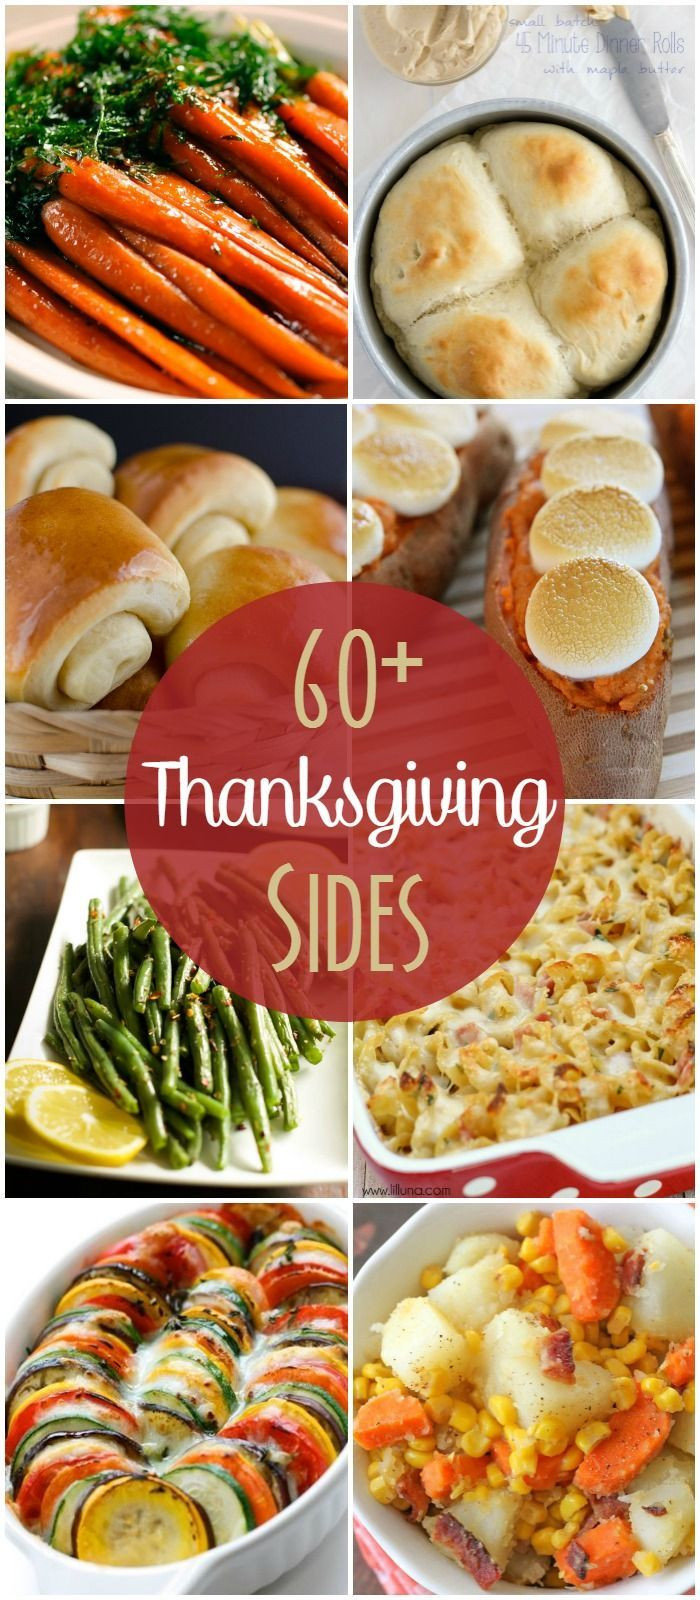 Thanksgiving Dinner Ideas Pinterest
 1000 images about Easy Thanksgiving Recipes & Crafts on